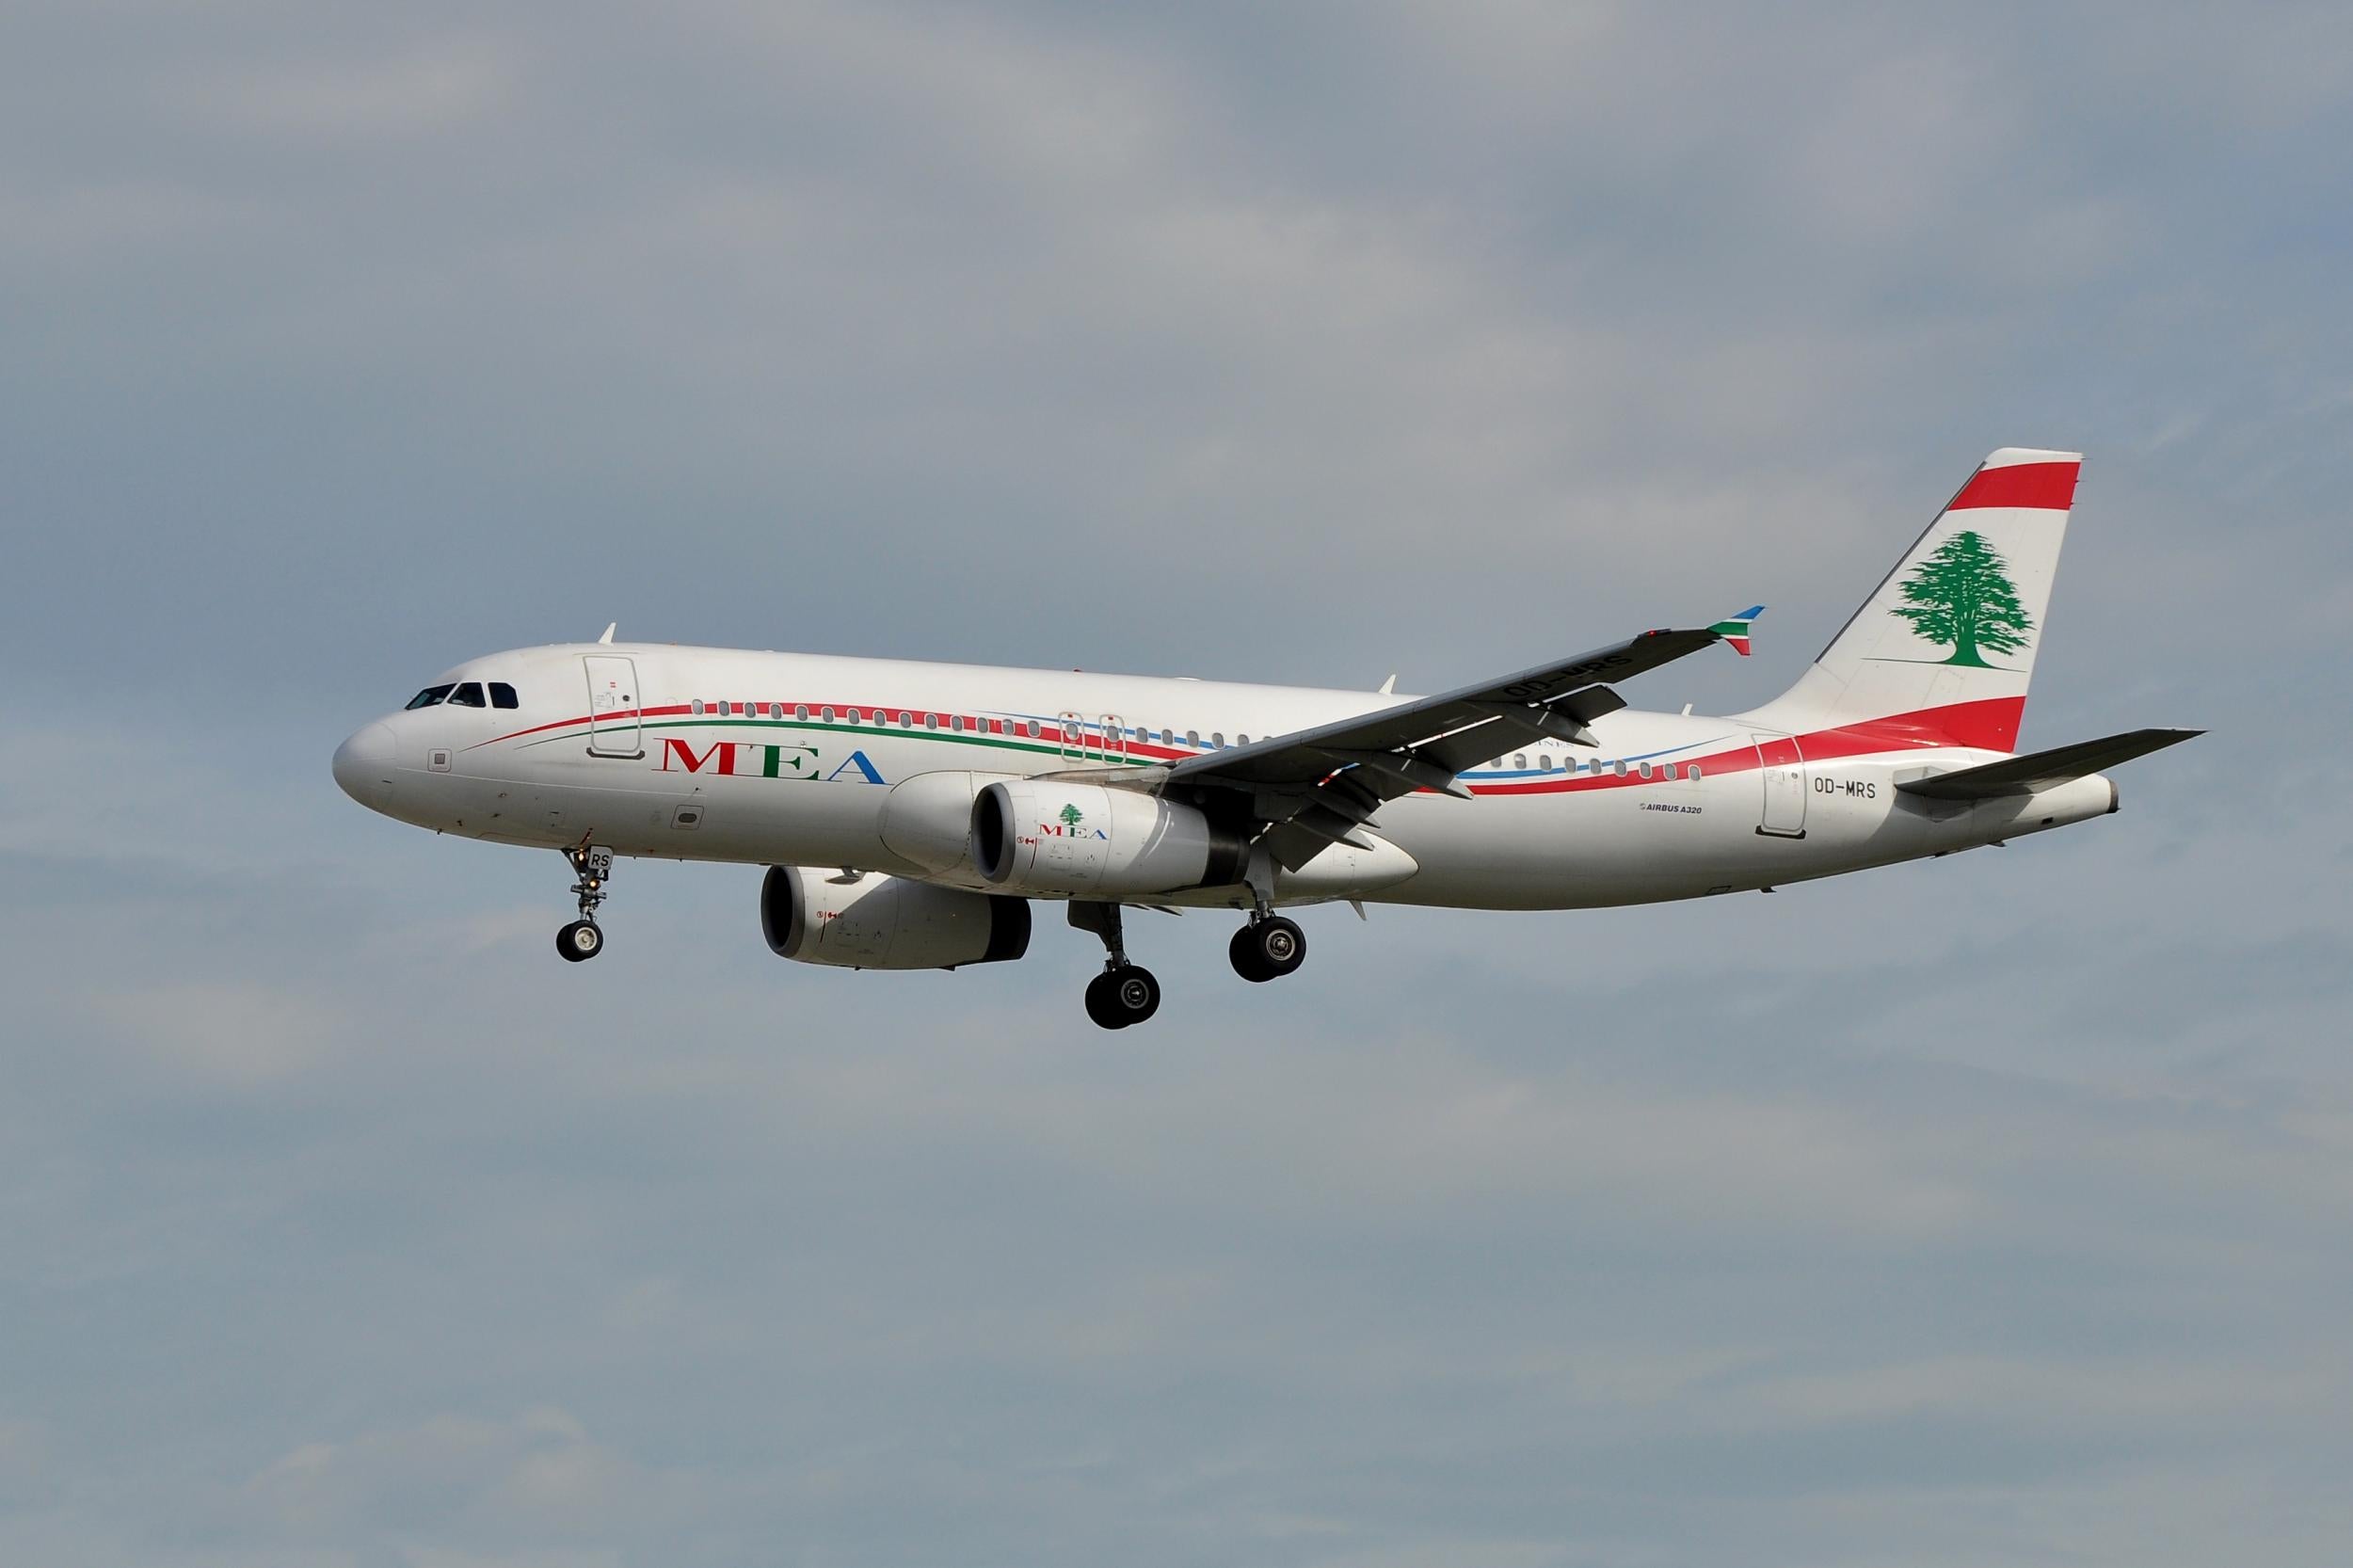 A woman gave birth onboard a Middle East Airlines flight